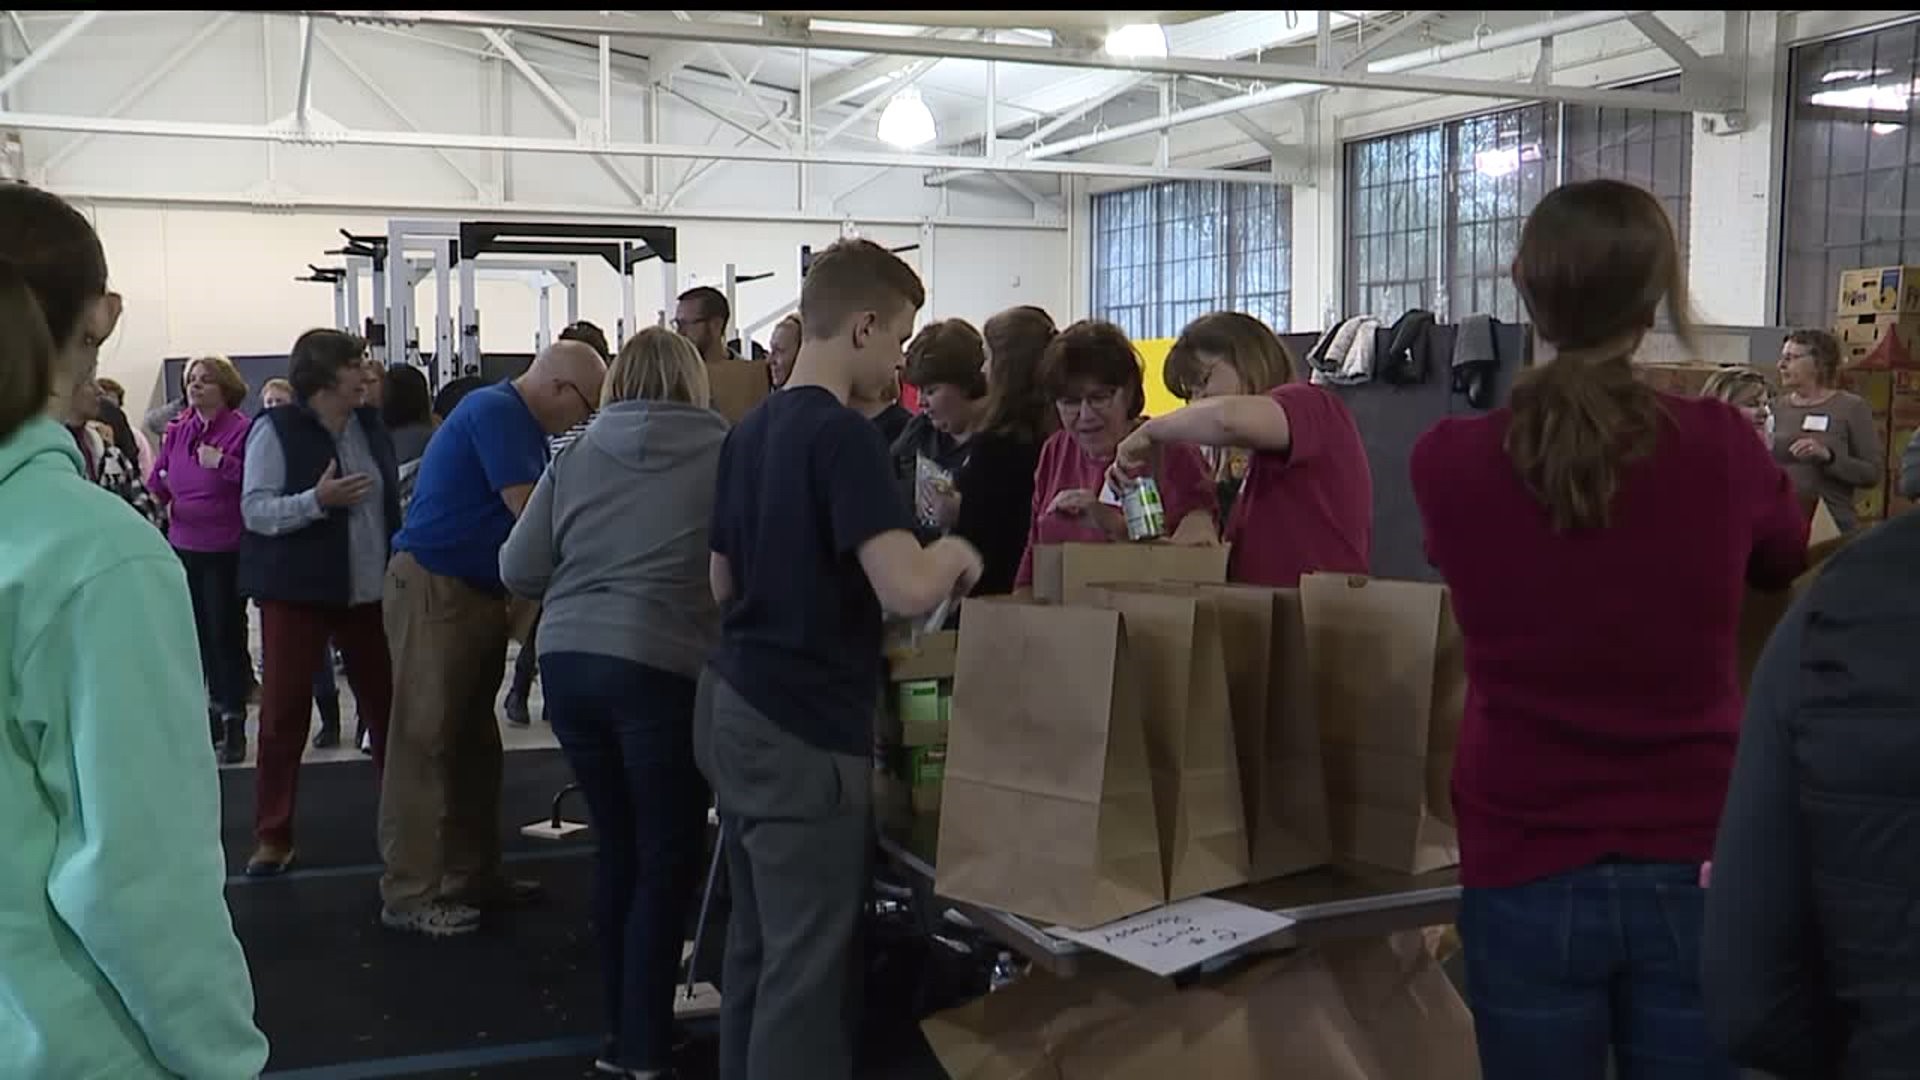 Organizations team up in York to distribute Thanksgiving meal boxes